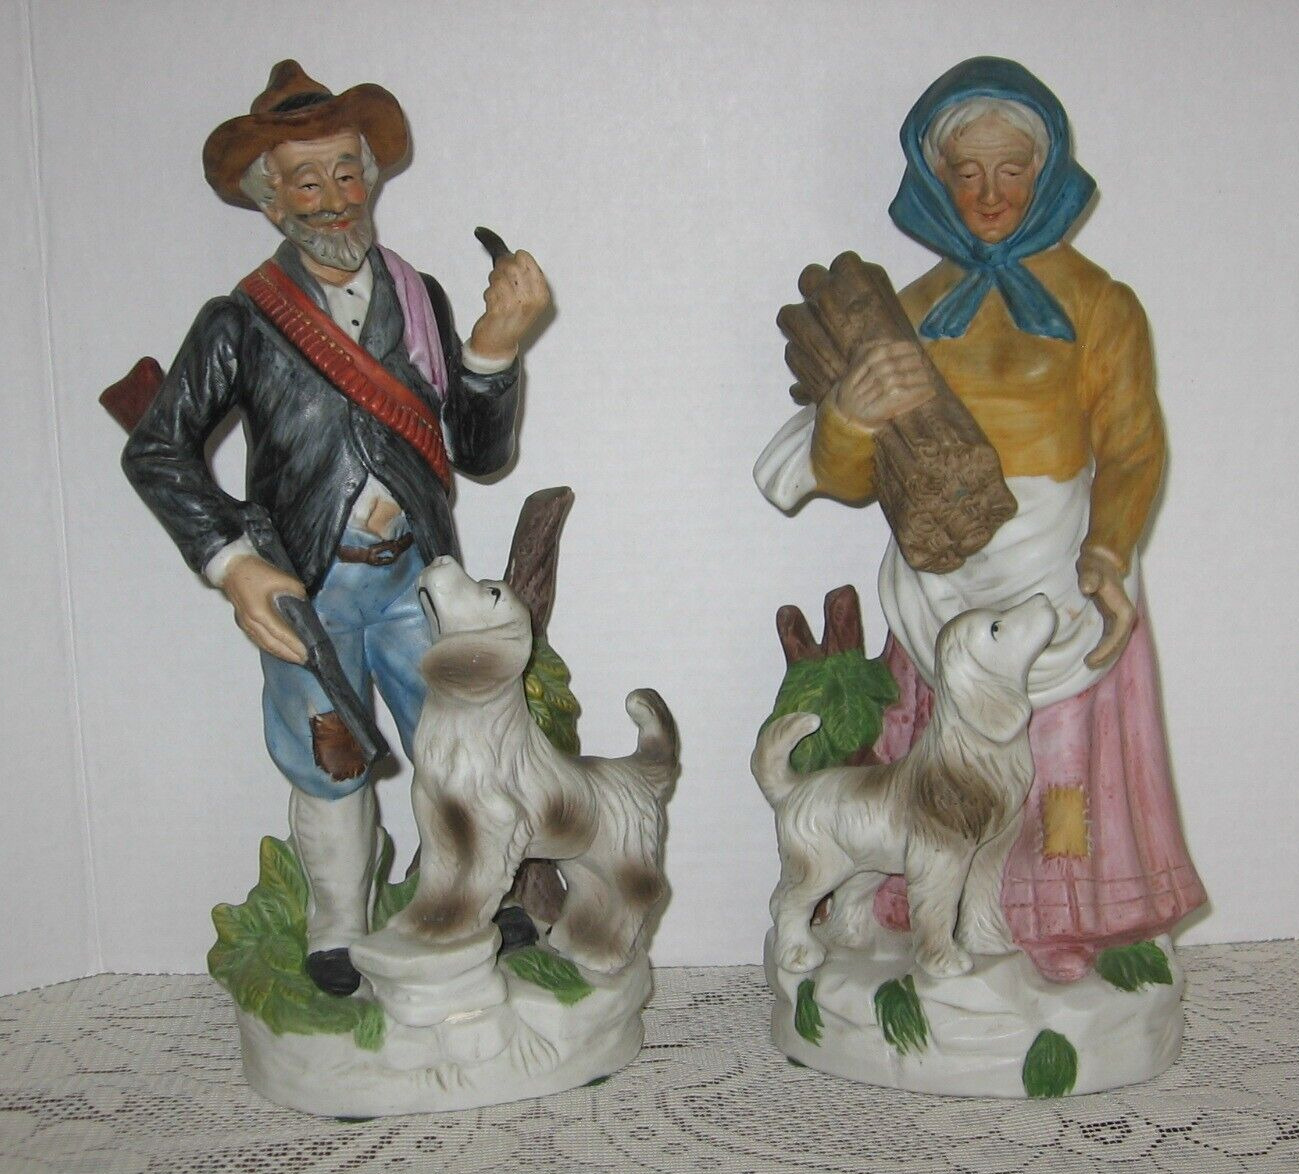 Vintage Homco 12” Porcelain Statue/Figurine Old Couple With Dogs Hunter/Gatherer